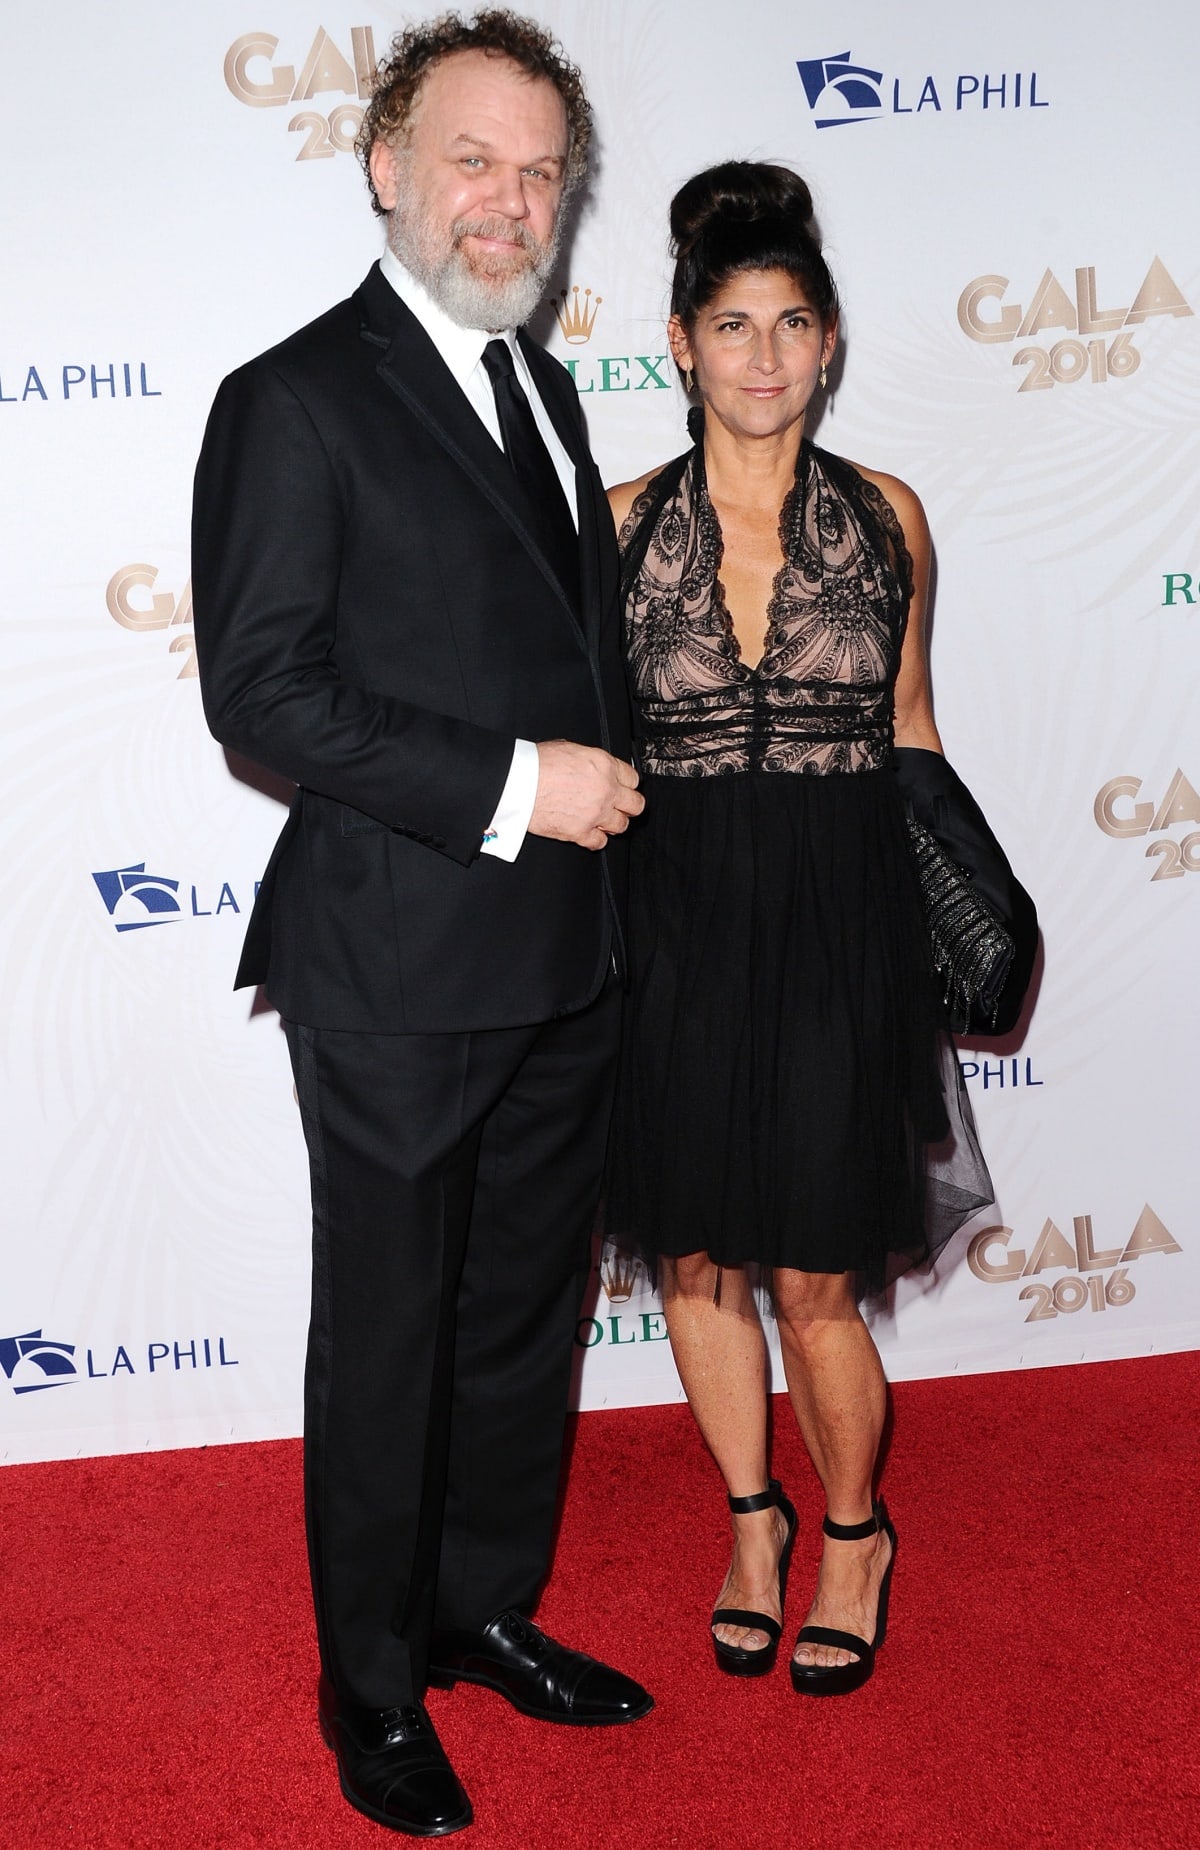 John C. Reilly and Alison Dickey attending the LA Philharmonic’s Walt Disney Concert Hall opening night concert and gala